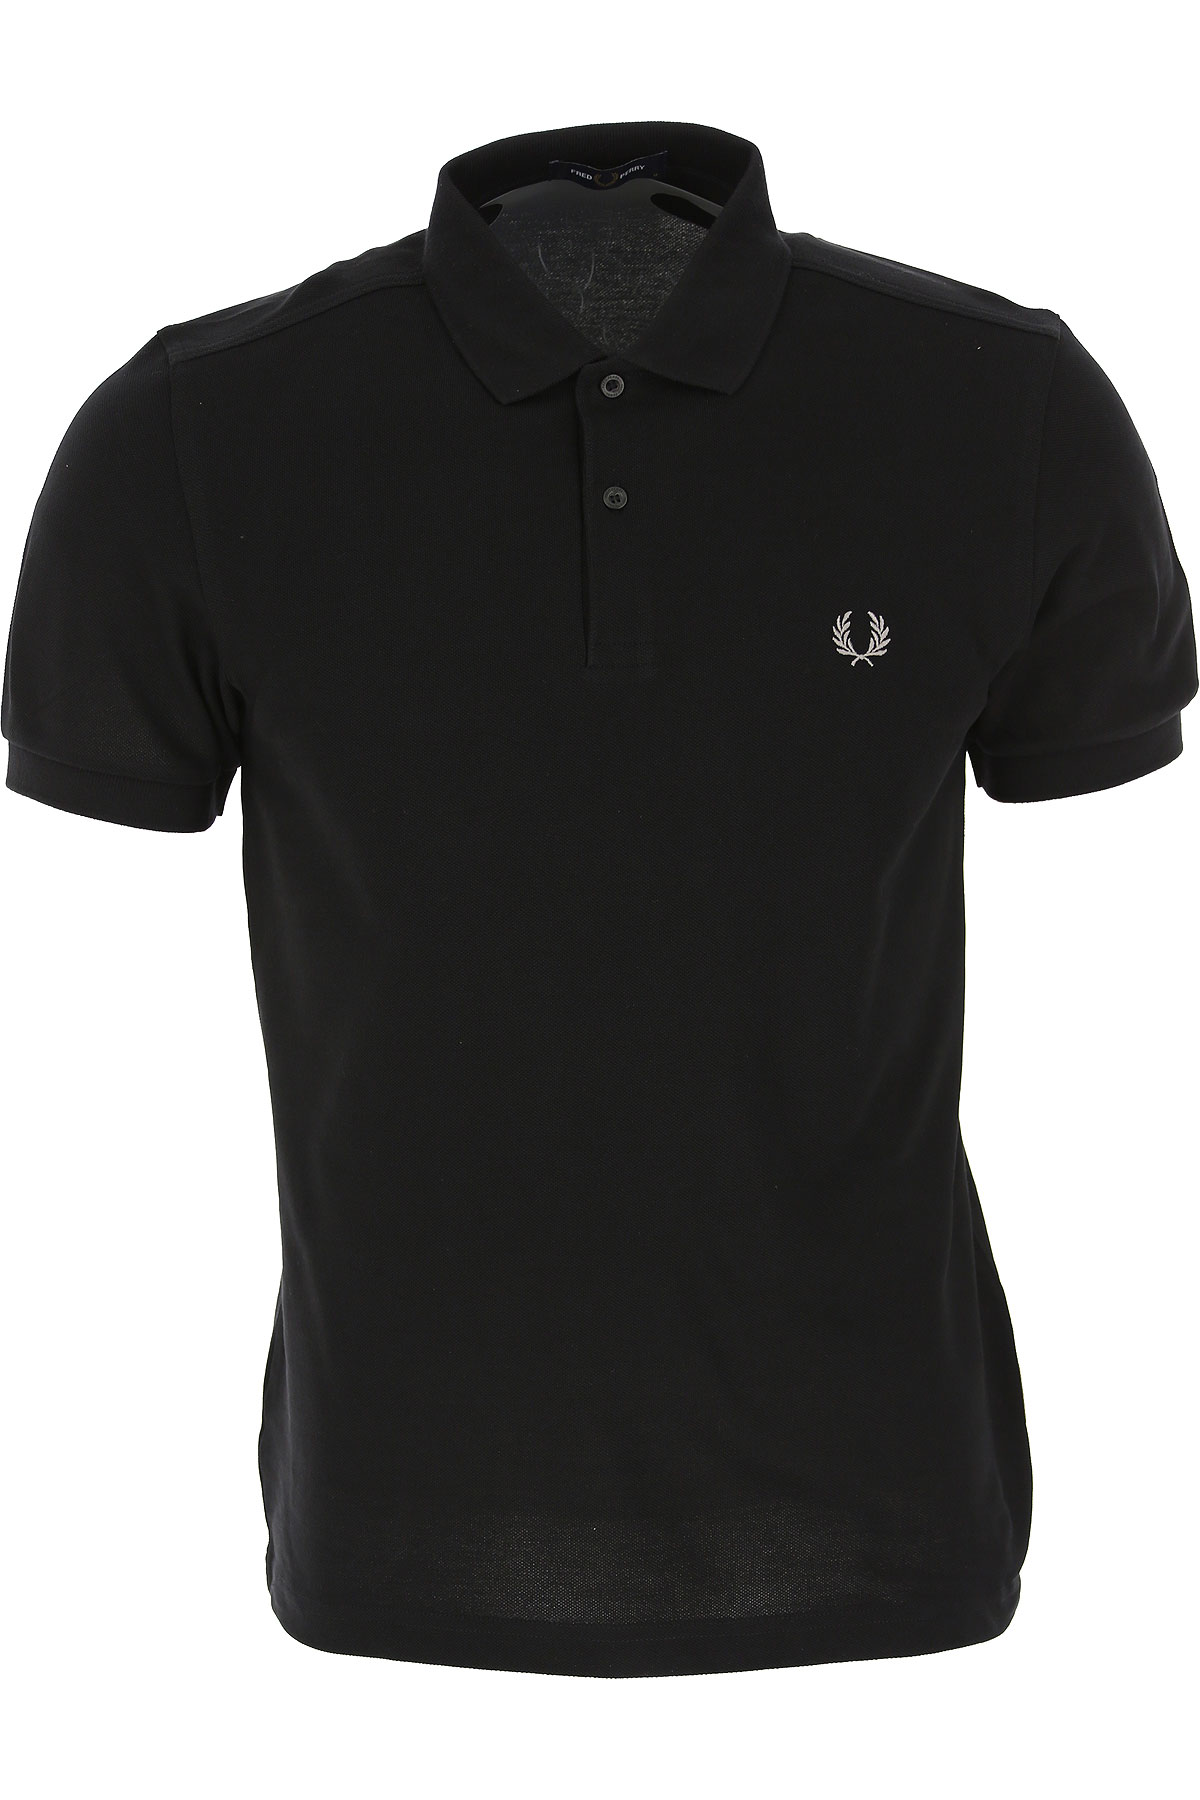 Mens Clothing Fred Perry, Style code: m6000-906-